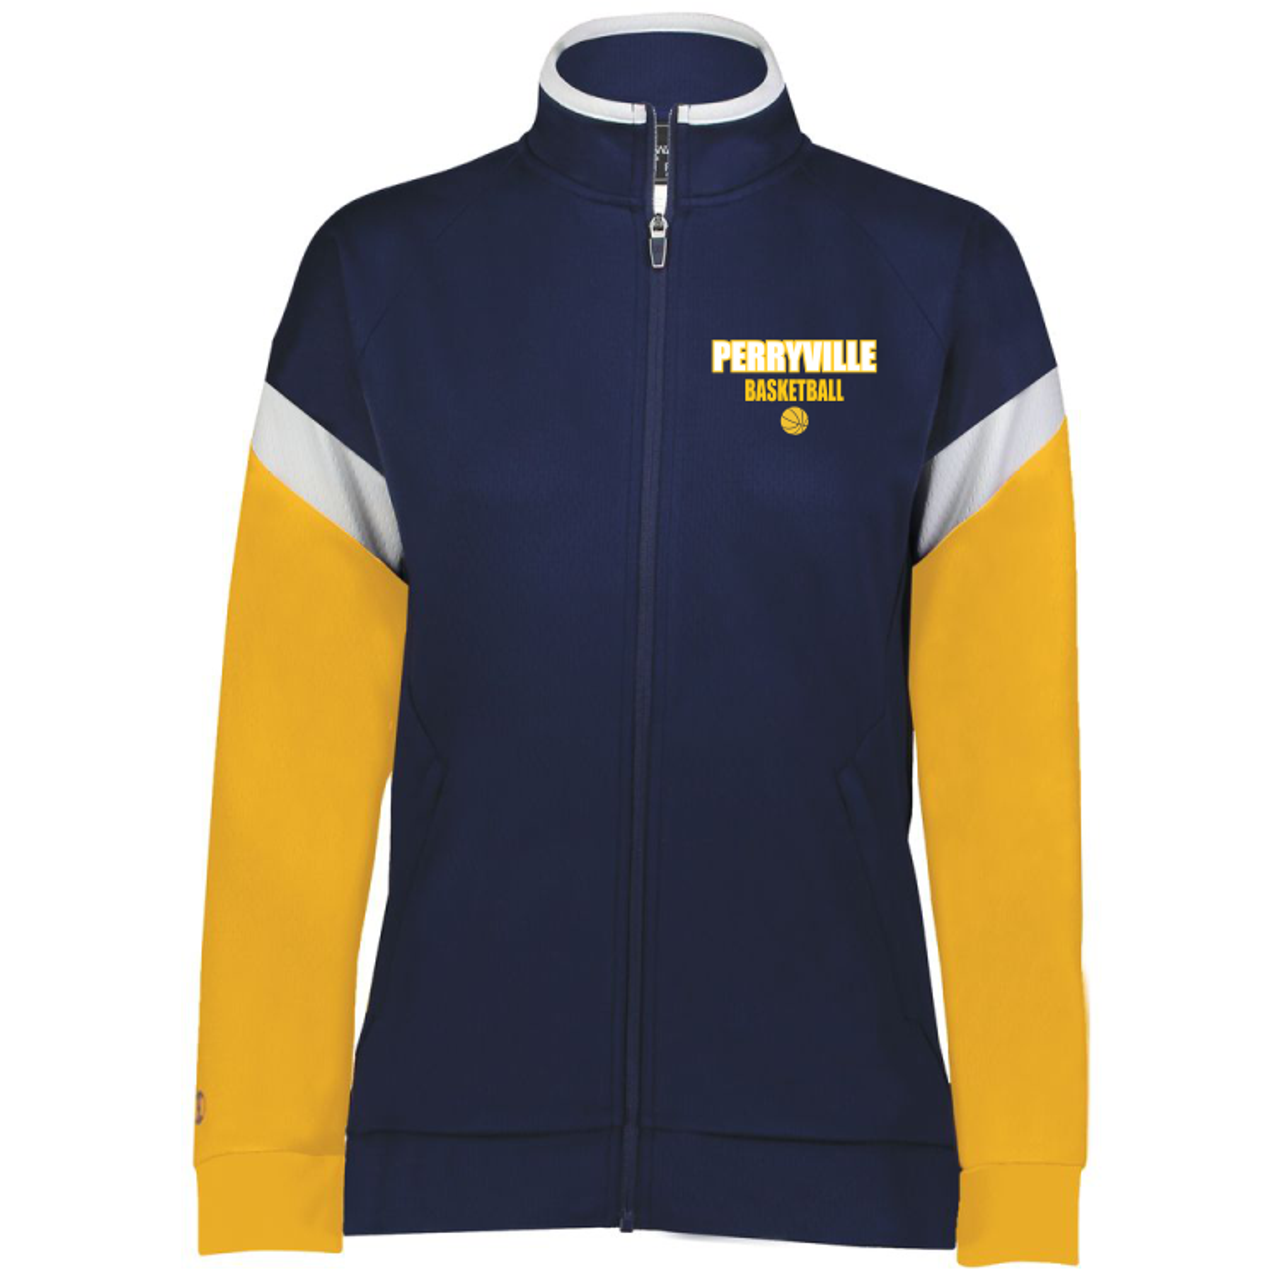 Perryville MS Basketball Warm Up Jacket